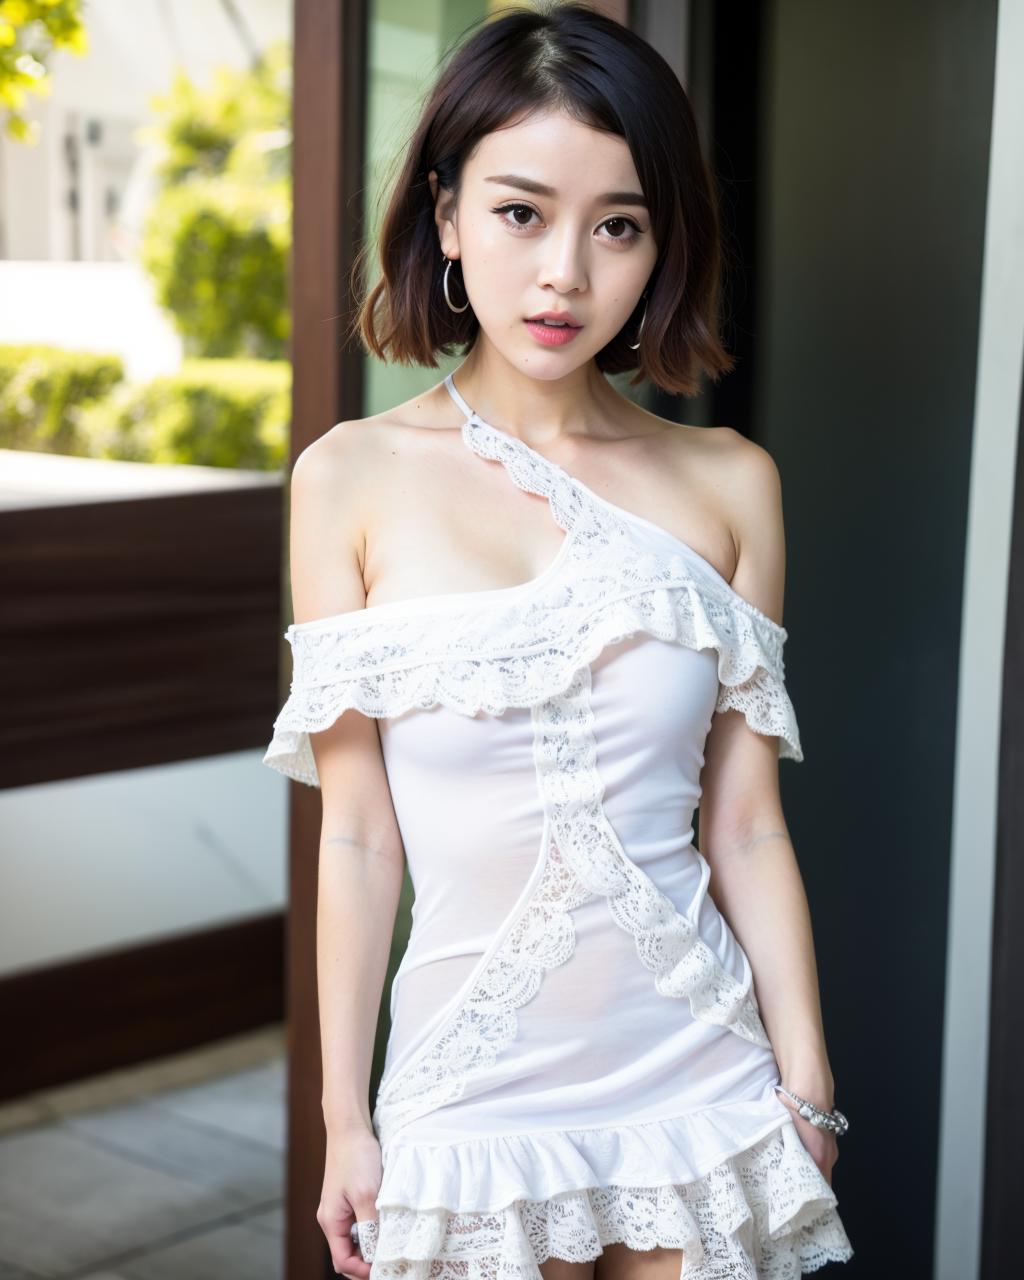 Asian Girl ZhaoXM LoRA image by NuIl